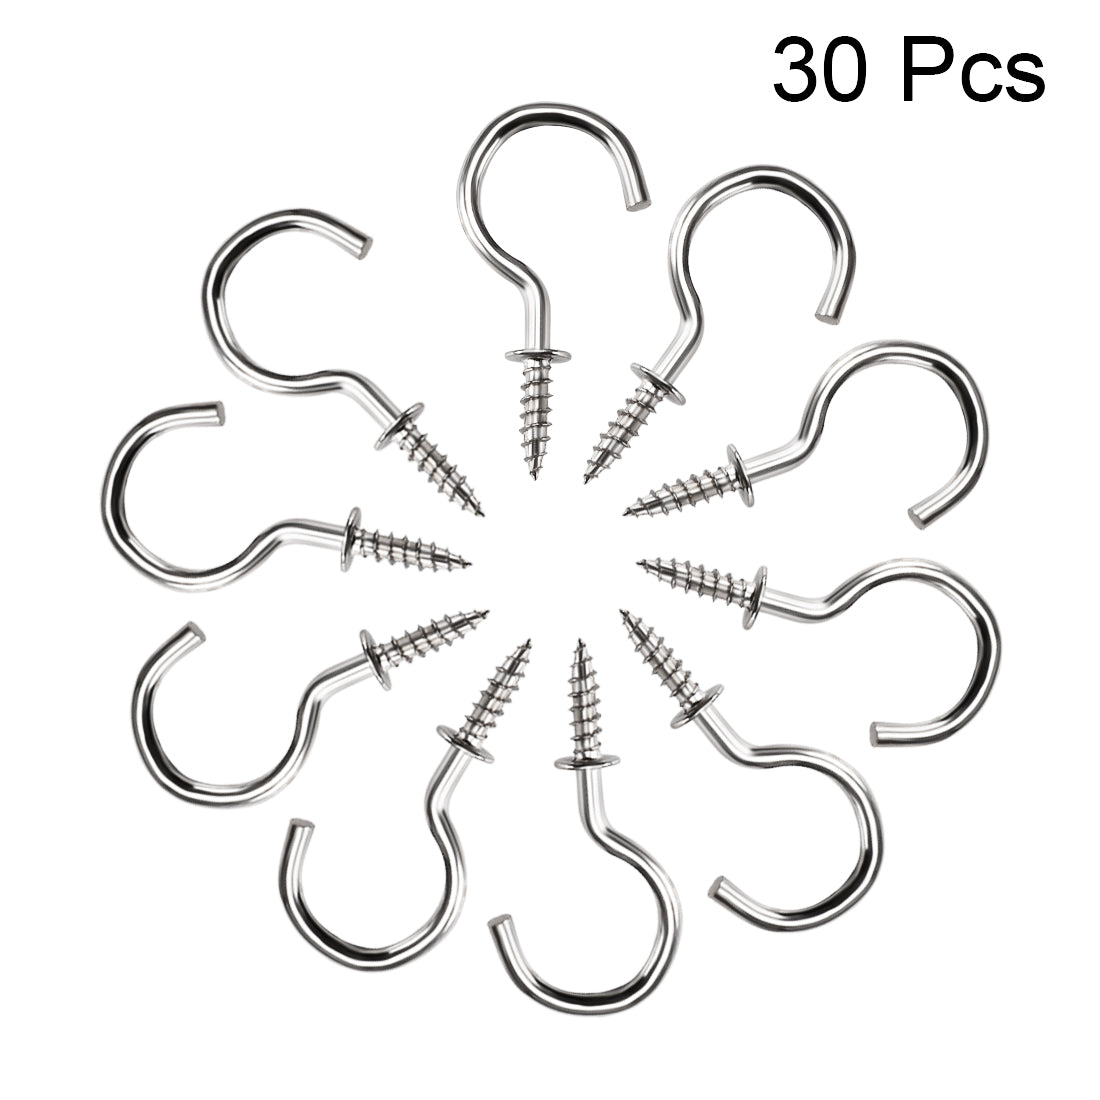 uxcell Uxcell 1.3" Screw Eye Hooks Self Tapping Screws Screw-in Hanger Eye-Shape Ring Hooks with Plate Silver 30pcs